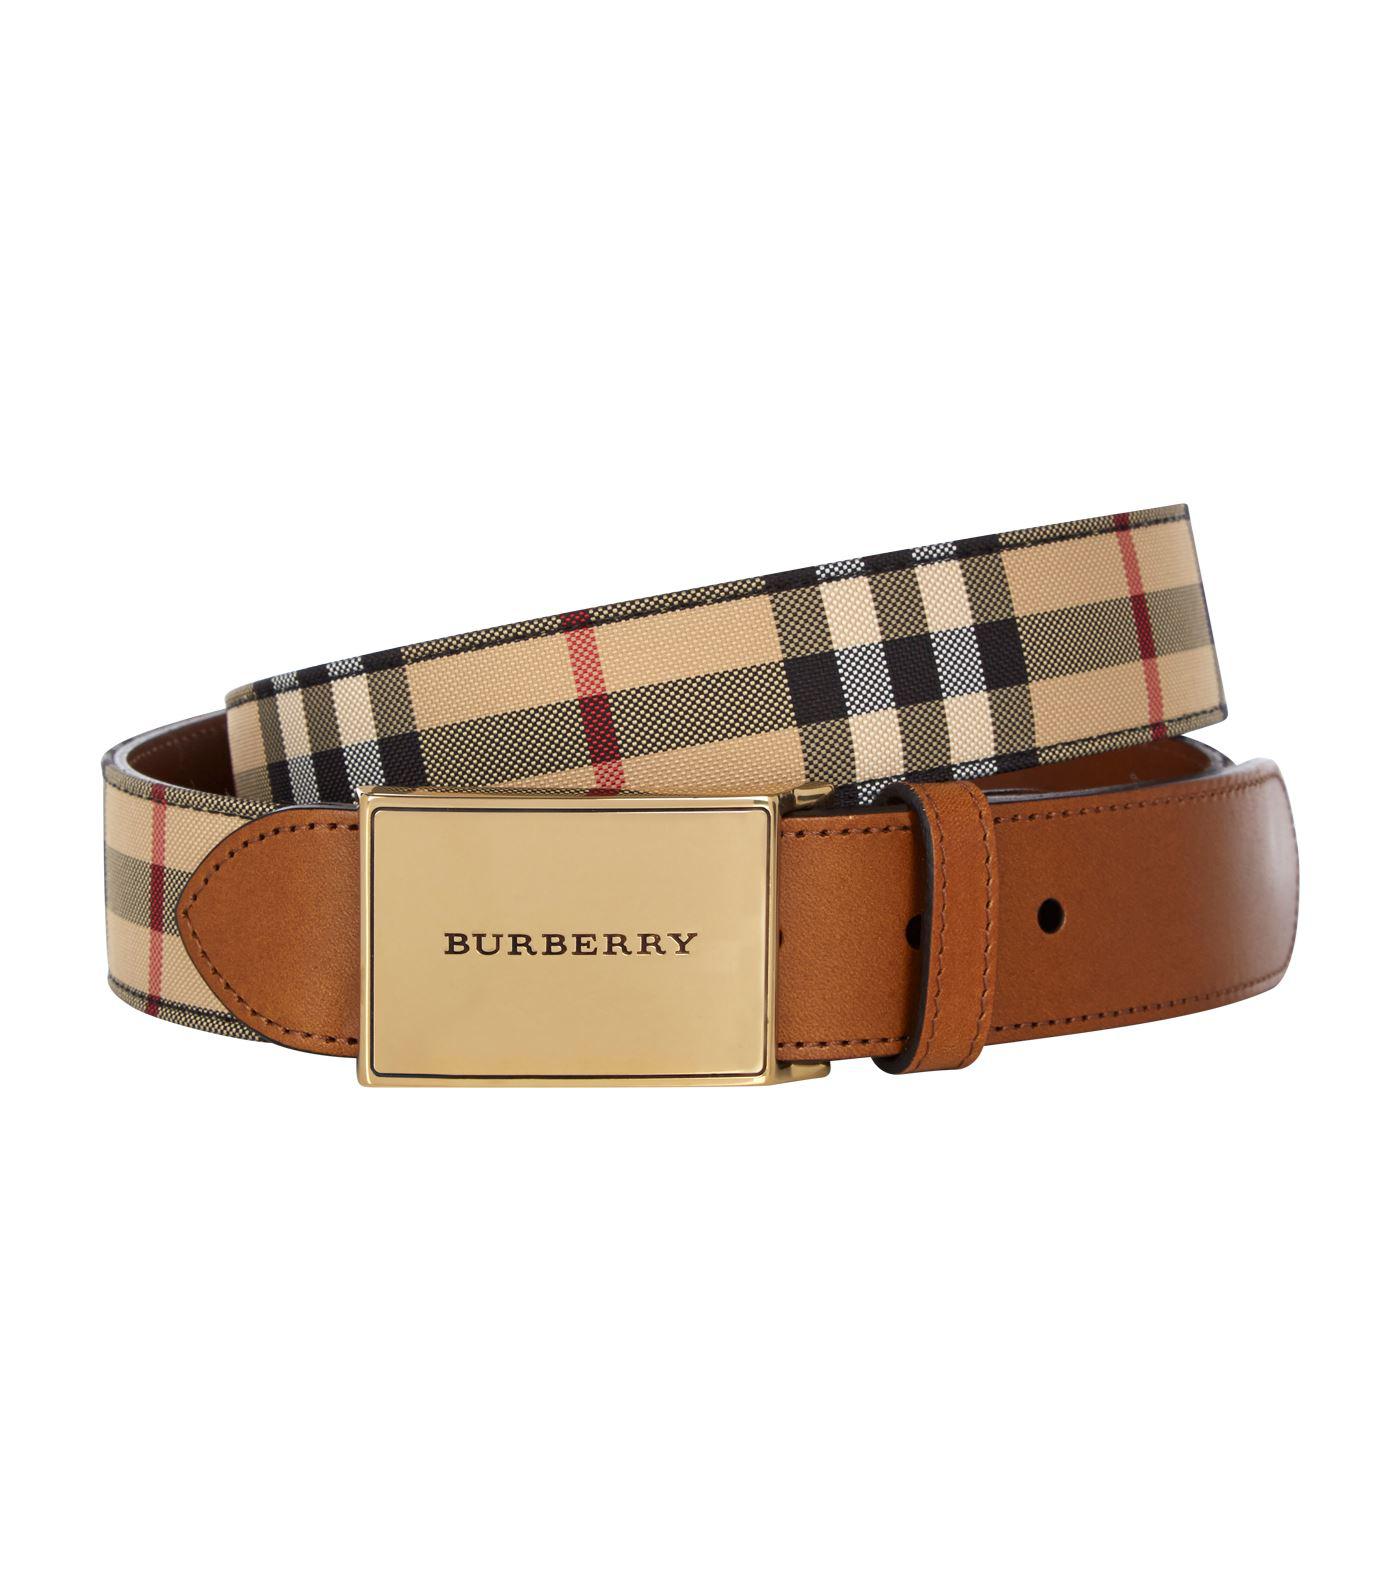 Lyst Burberry House Check Gold Buckle Belt Brown 75 In Brown For Men